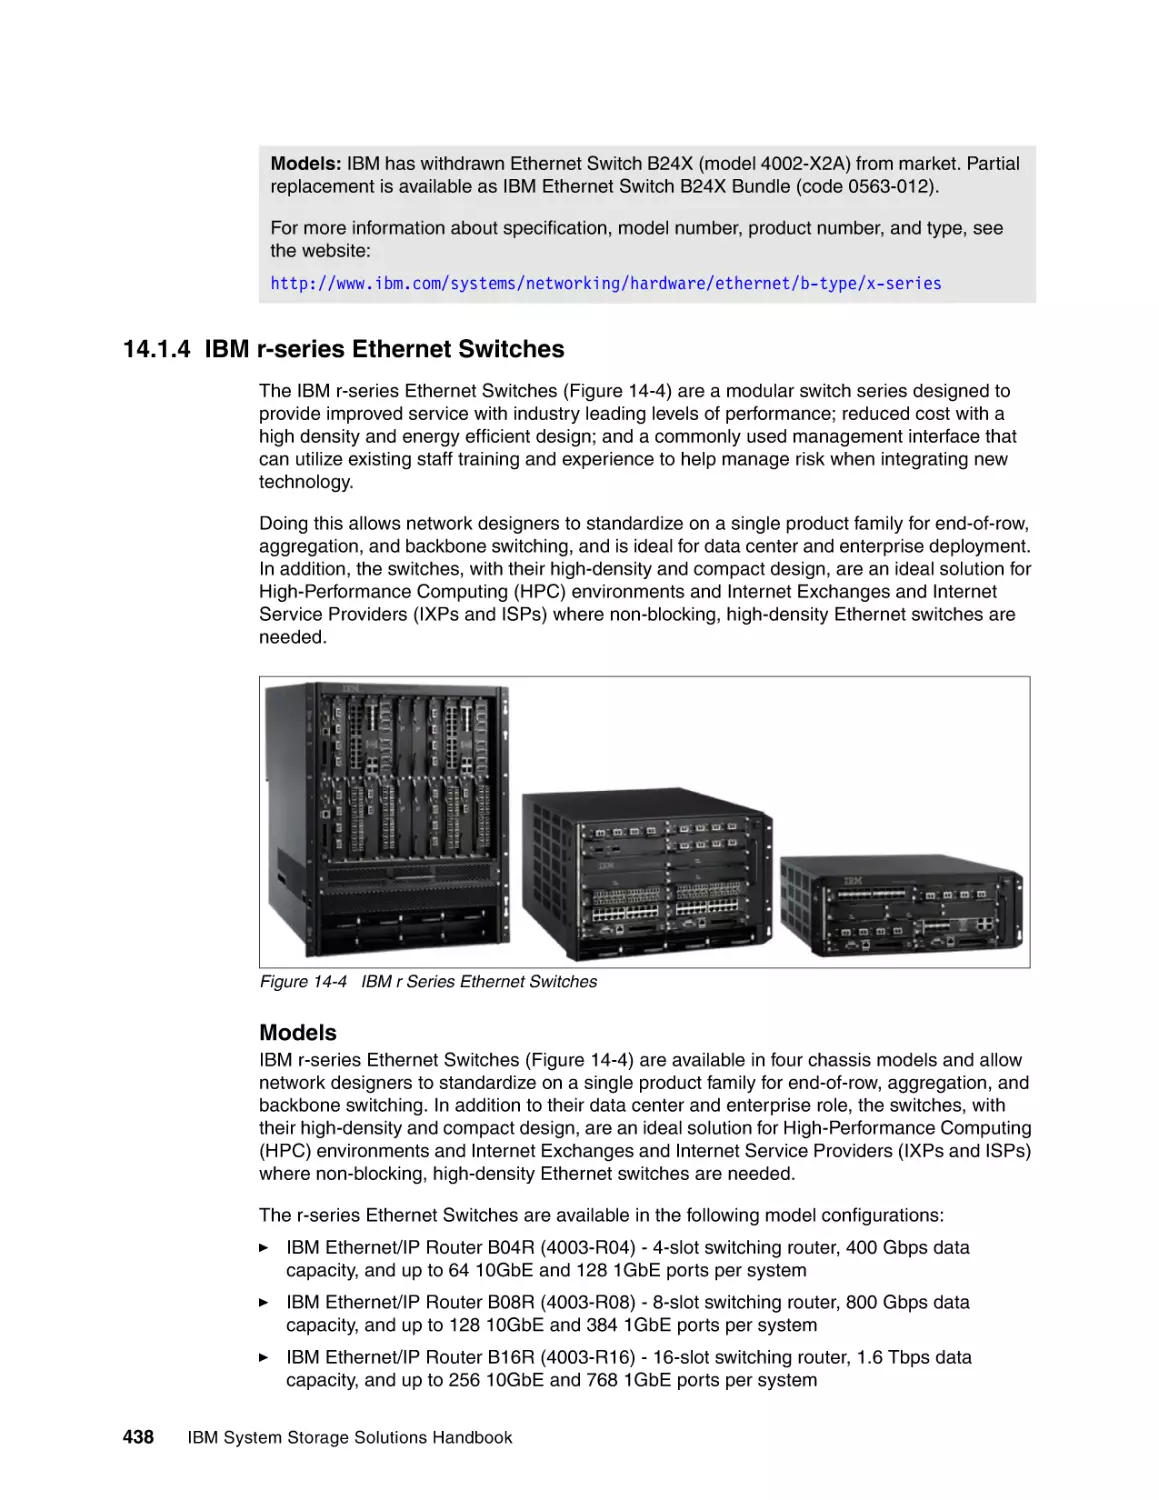 14.1.4 IBM r-series Ethernet Switches